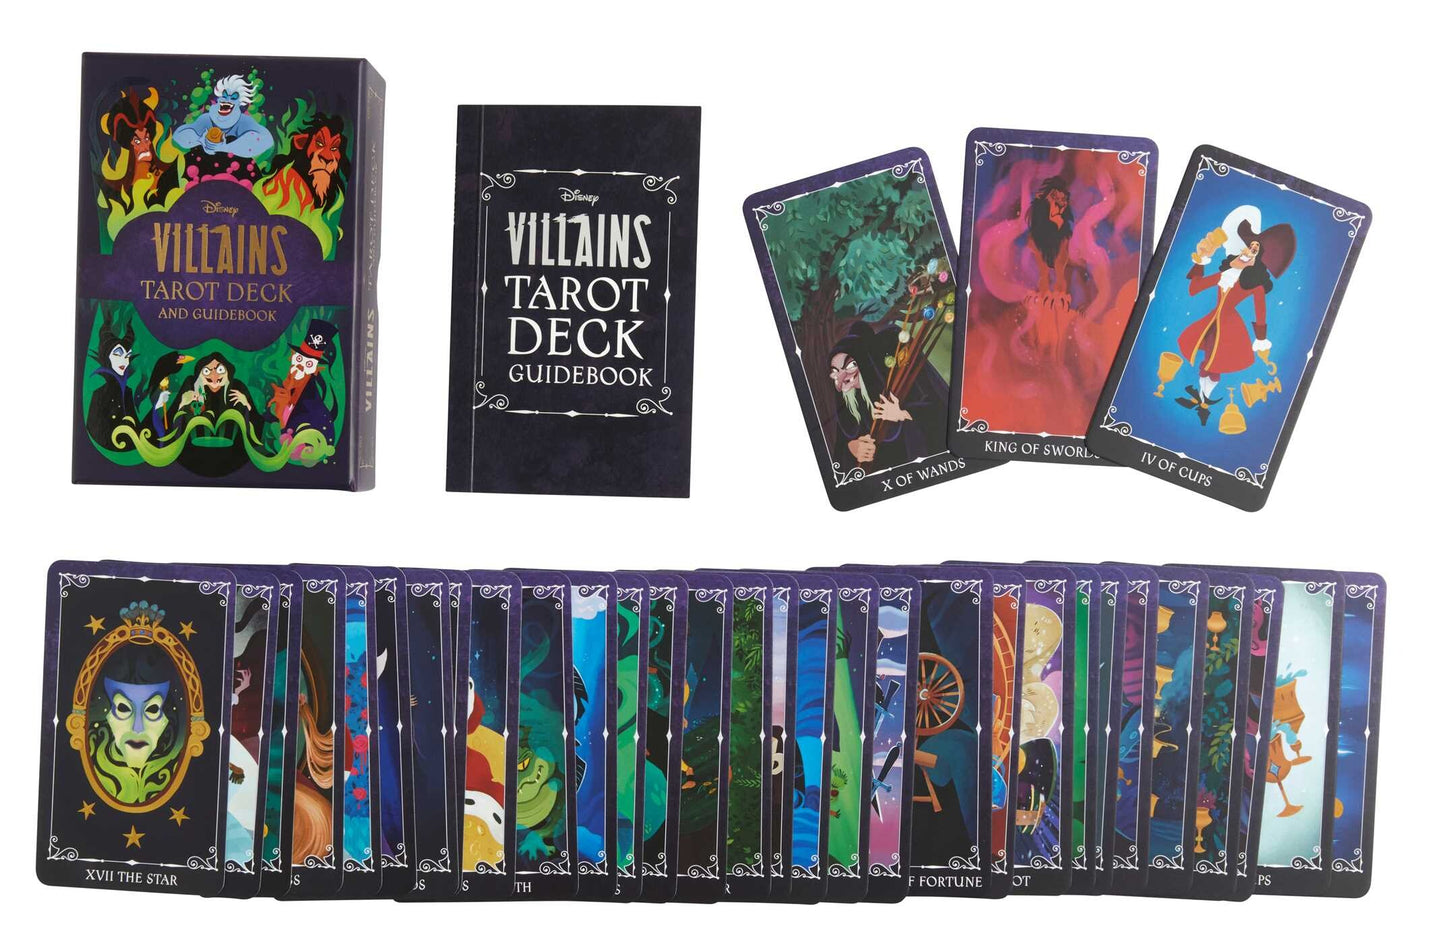 disney villains deck guidebook and cards